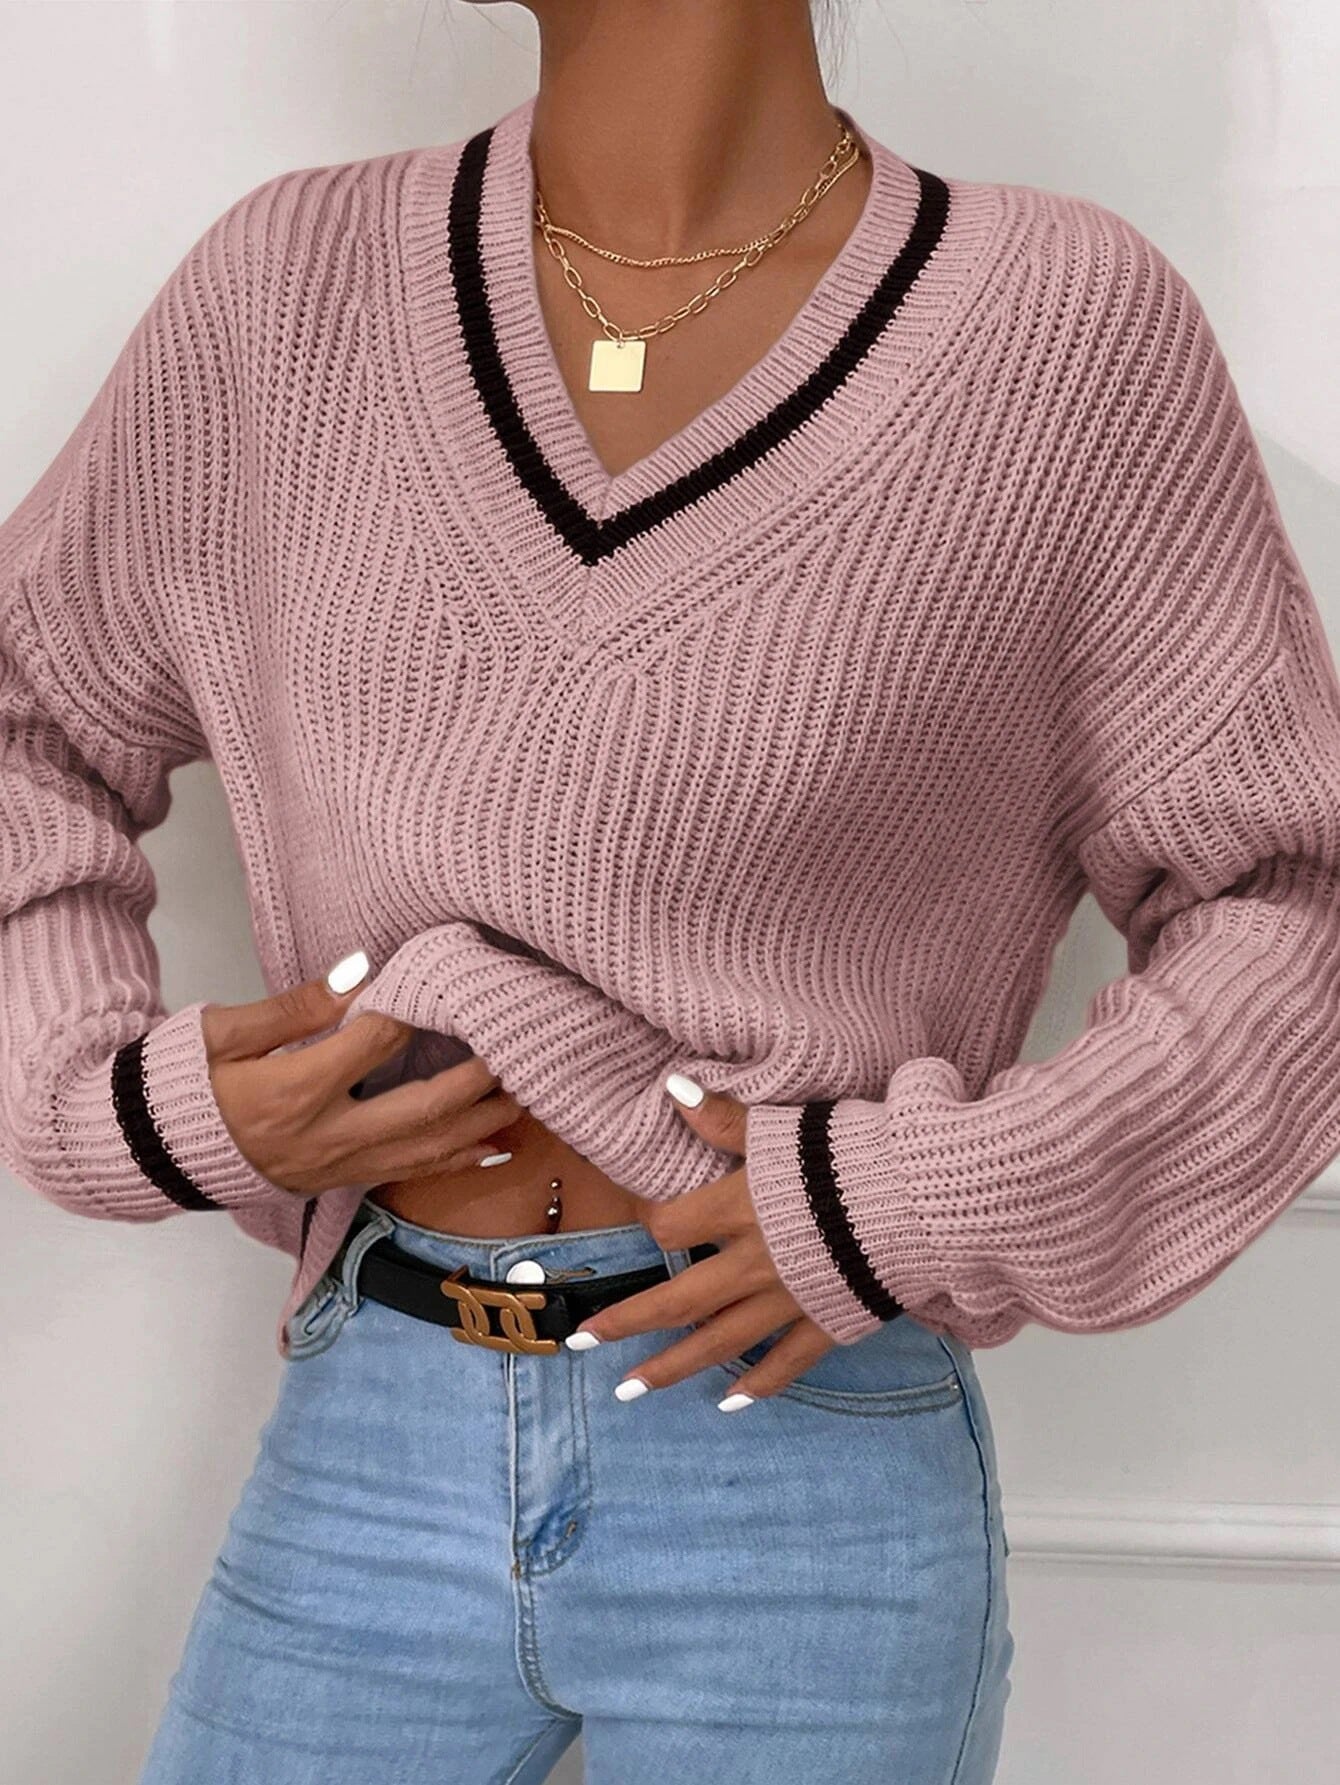 Winter Women's Clothes Cable Knit V Neck Sweaters Casual Long Sleeve Striped Pullover Sweater Trendy Loose Preppy Jumper Top